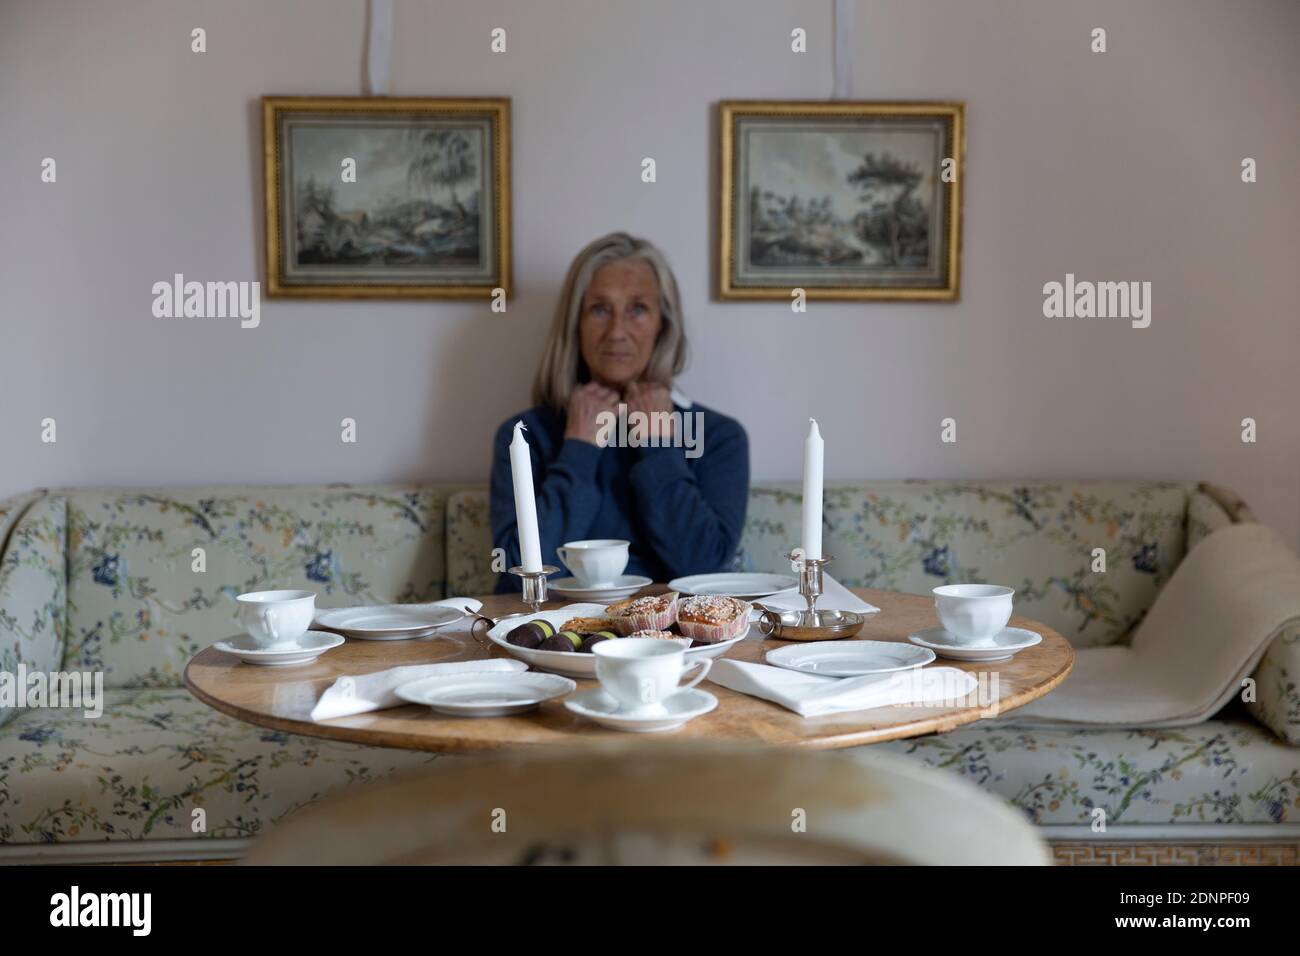 Woman sitting at table Banque D'Images